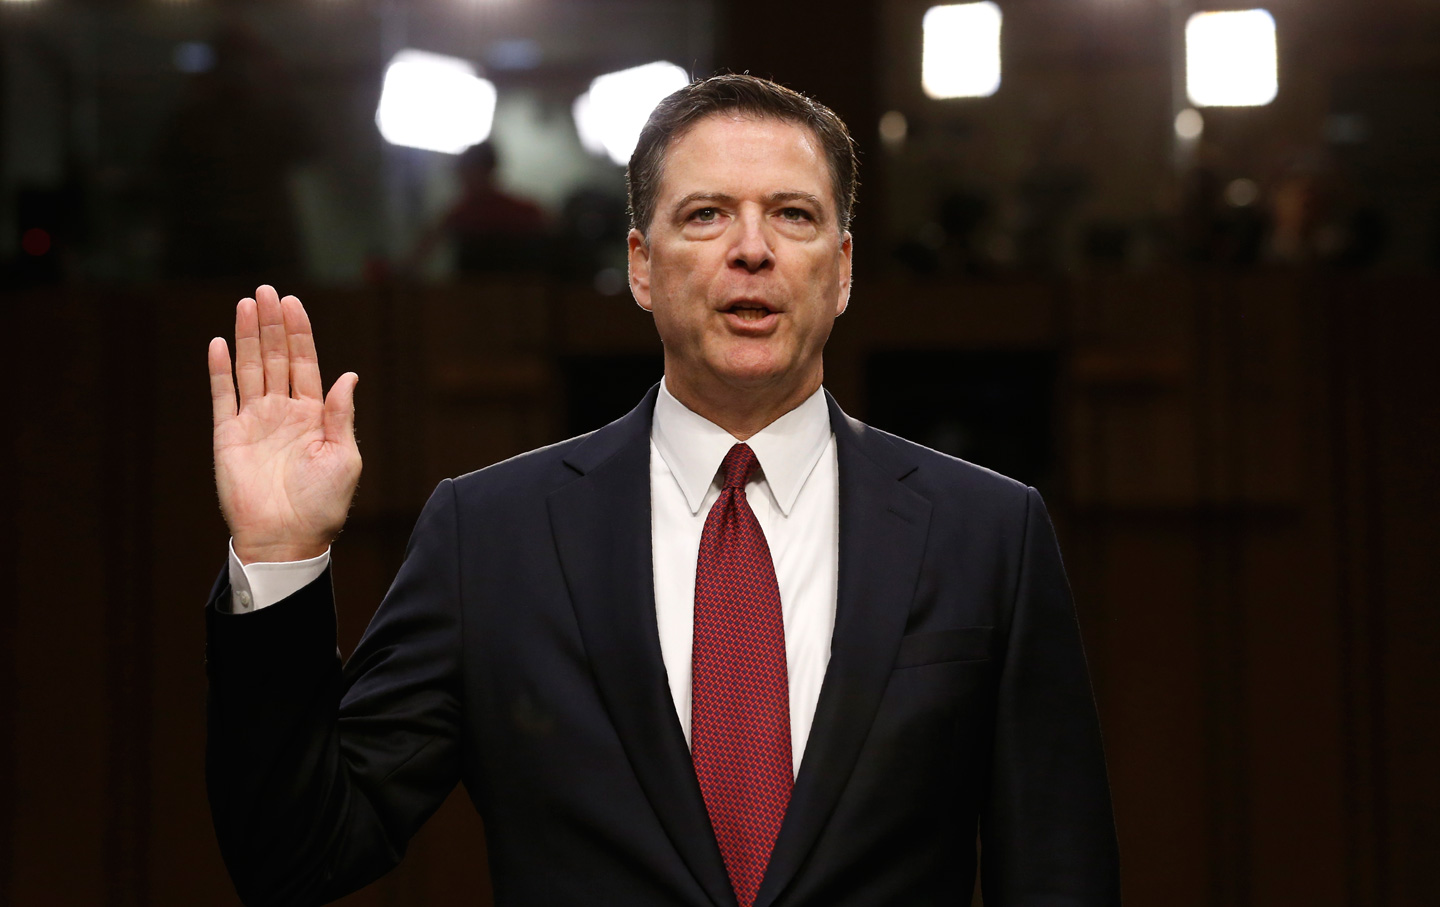 The Poet in James Comey’s Soul